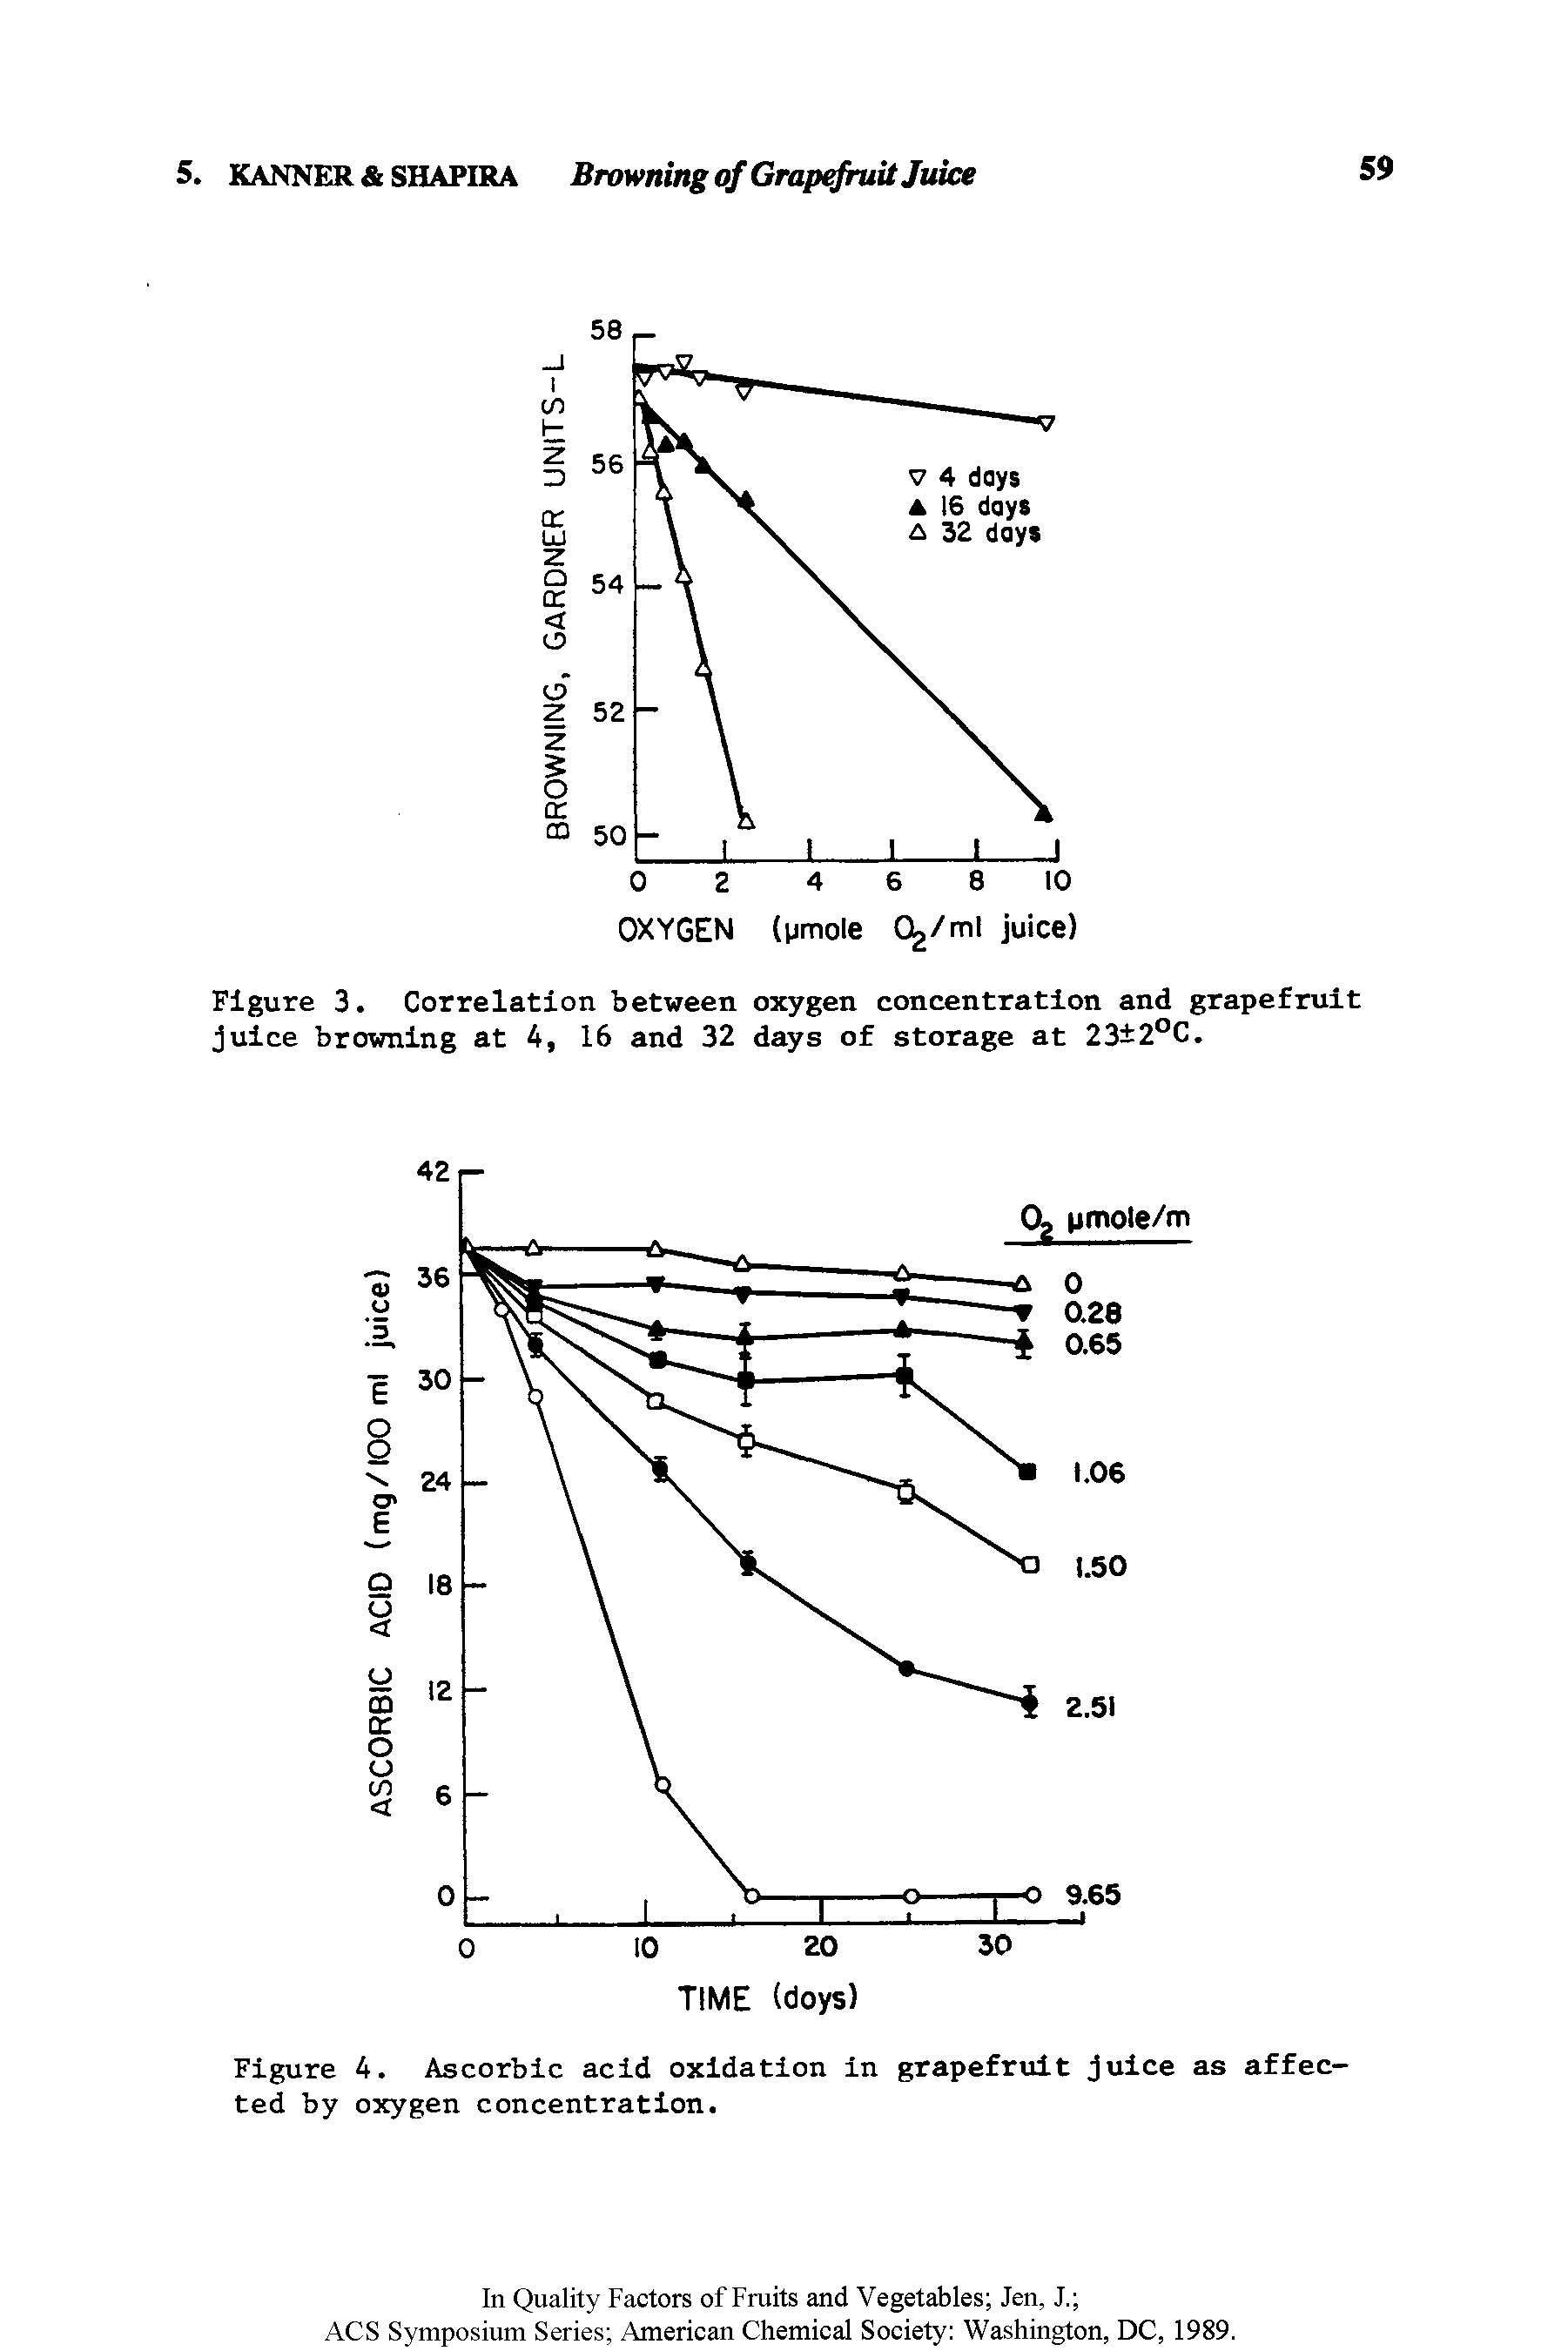 Figure 3. Correlation between oxygen concentration and grapefruit juice browning at 4, 16 and 32 days of storage at 23 2°C.